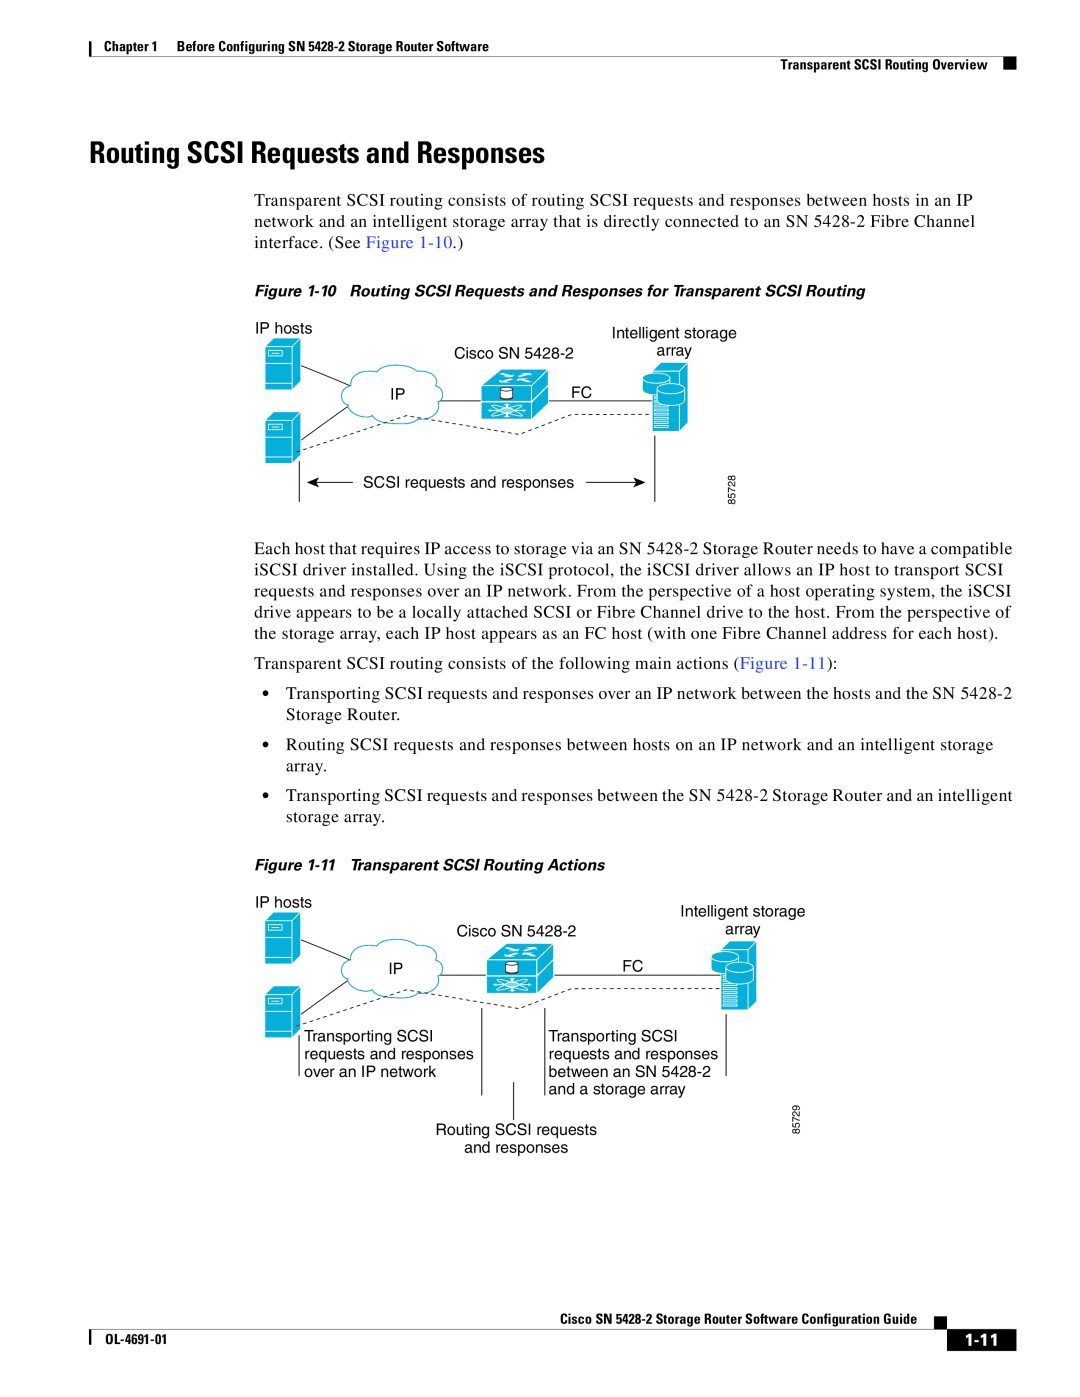 Cisco Systems SN 5428-2 manual 1-11, Routing SCSI Requests and Responses, 11 Transparent SCSI Routing Actions 